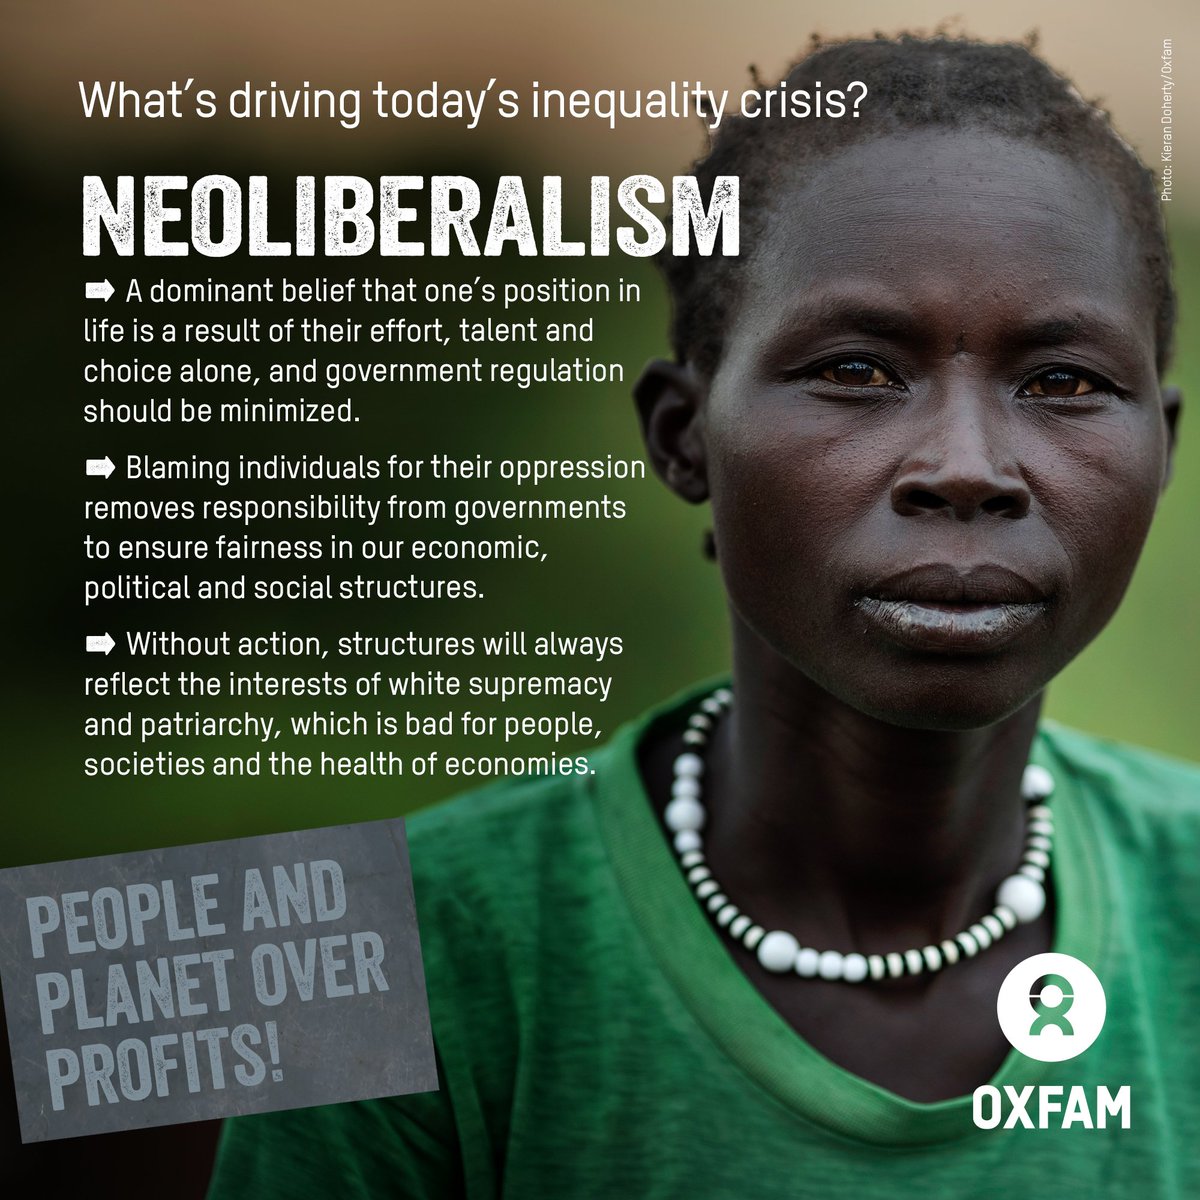 Third driver of the Inequality crisis3. NEOLIBERALISMCreation of the myth of meritocracy, & push to keep"government interference"out of the"economic free market"Neoliberalism blames individuals for the systemic oppressions they face, & absolves govts of resp to ensure fairness